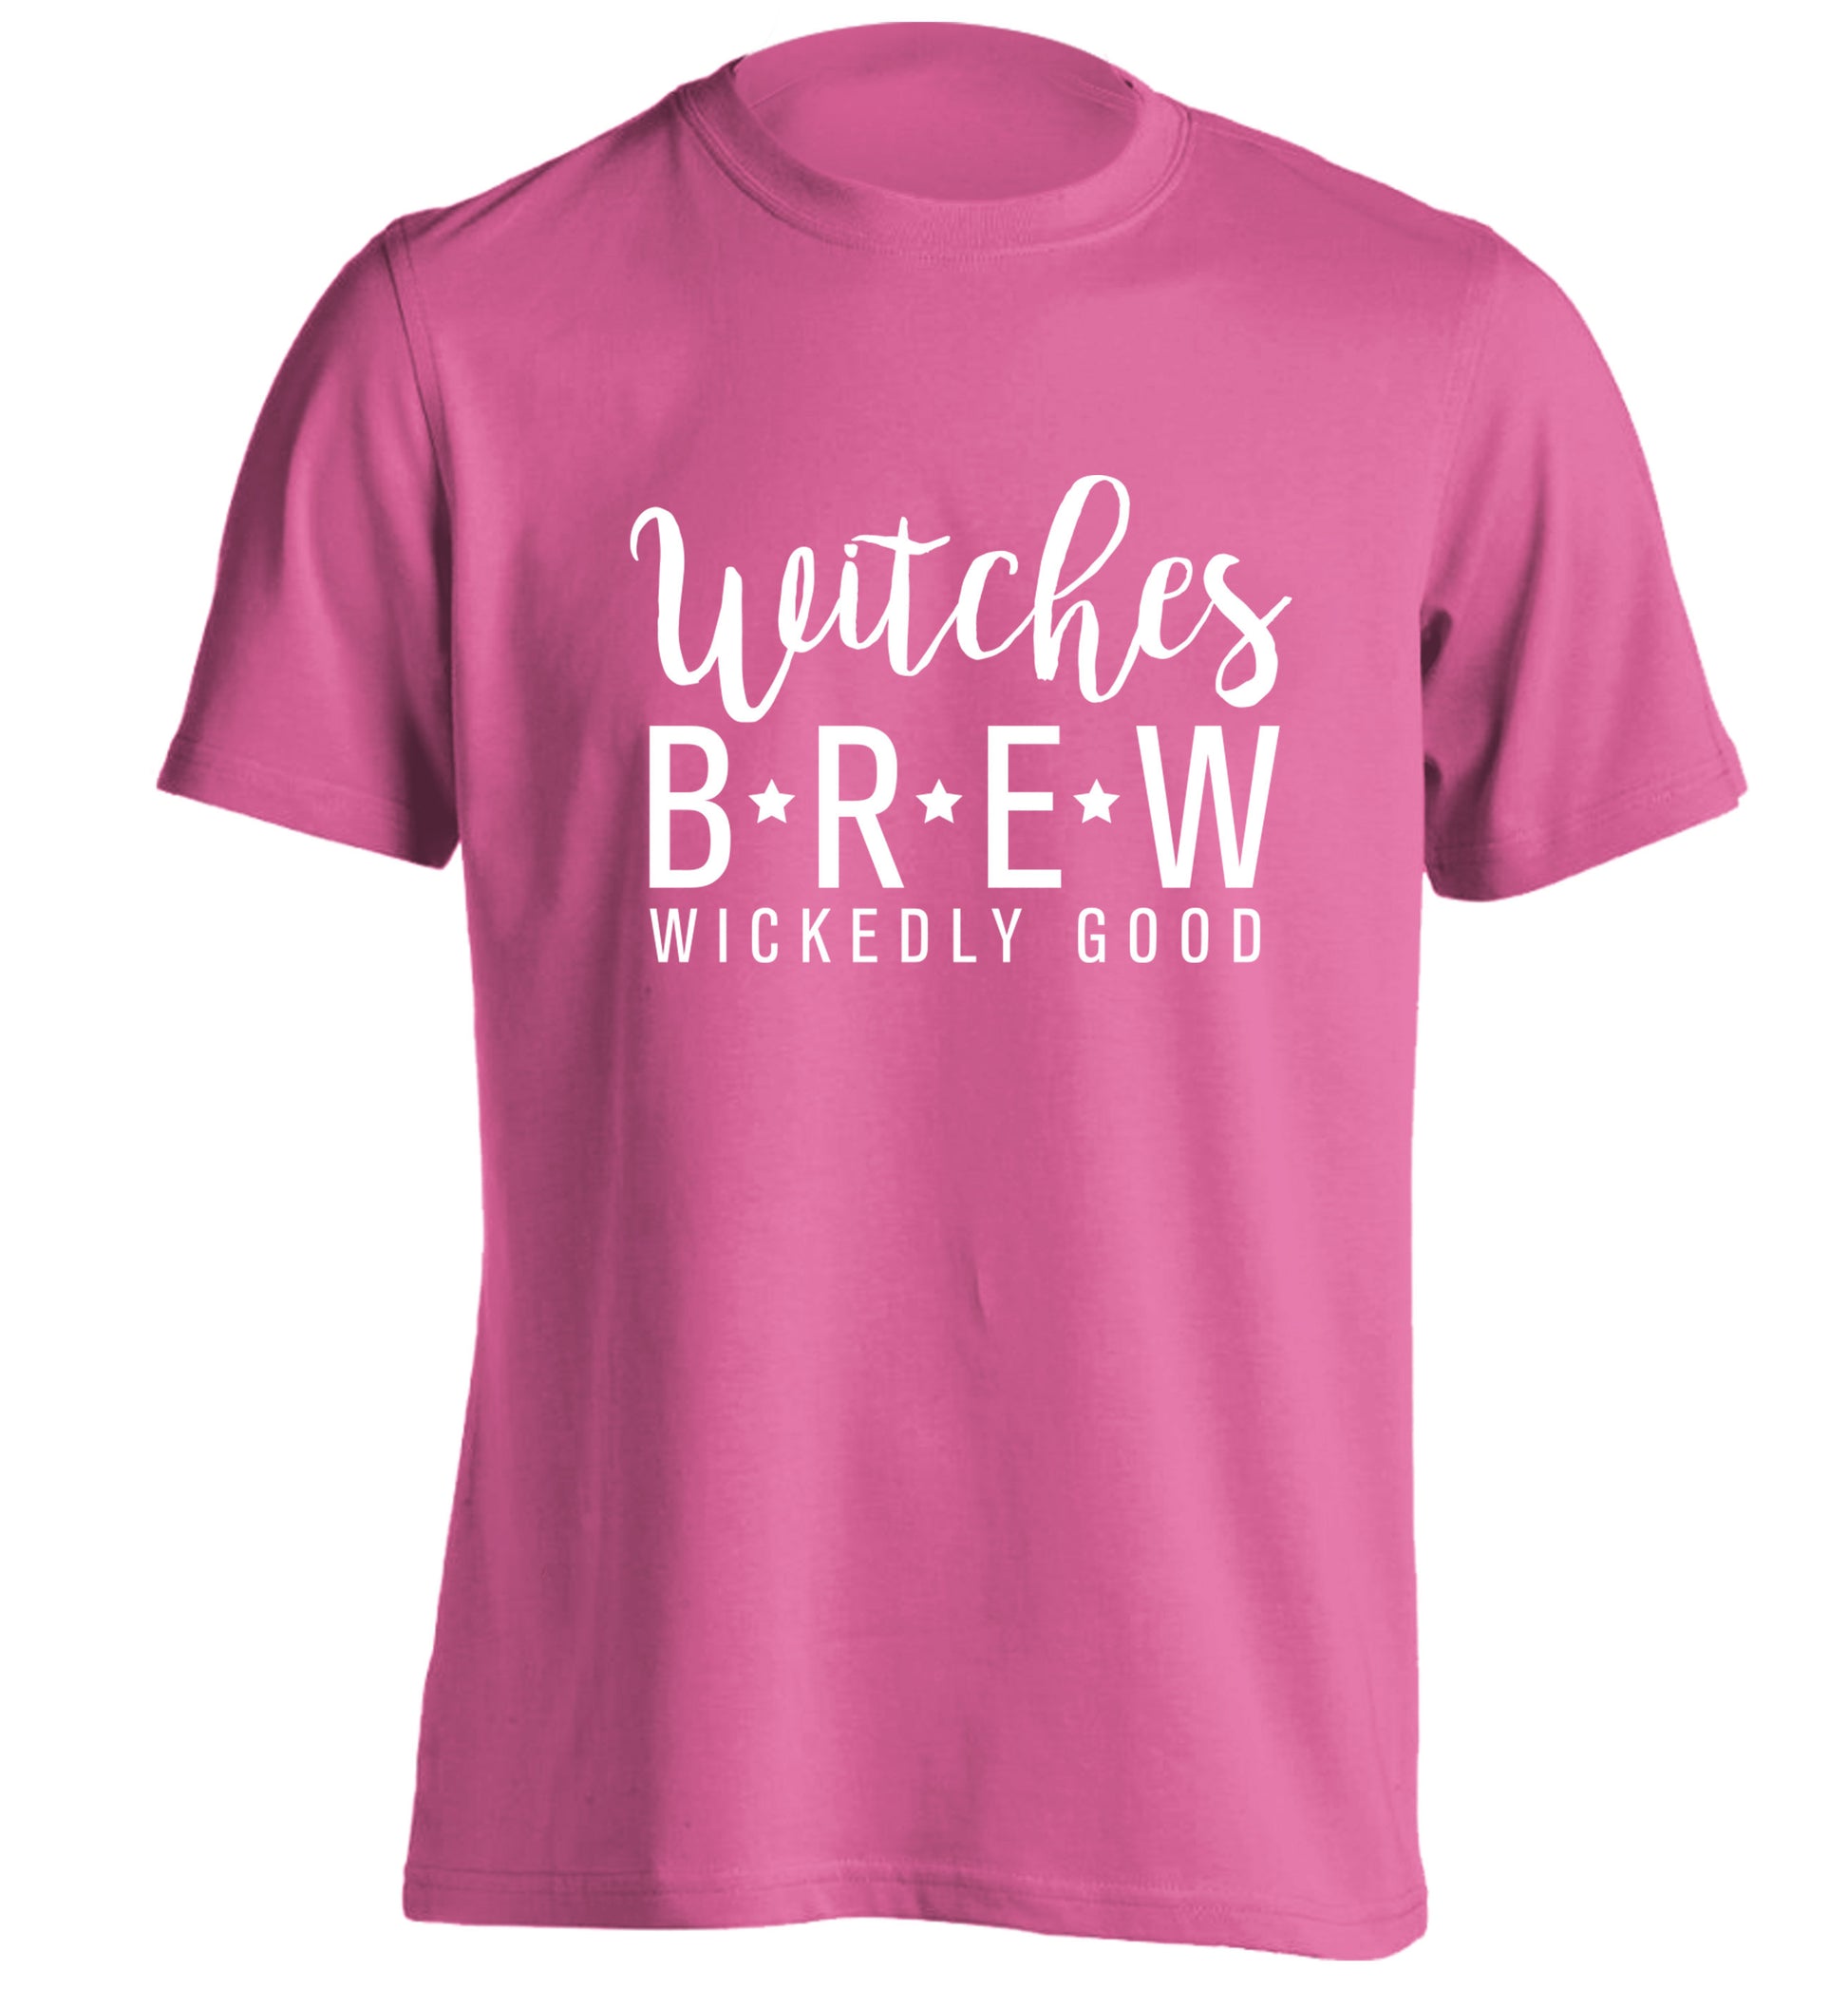 Witches Brew wickedly good adults unisex pink Tshirt 2XL